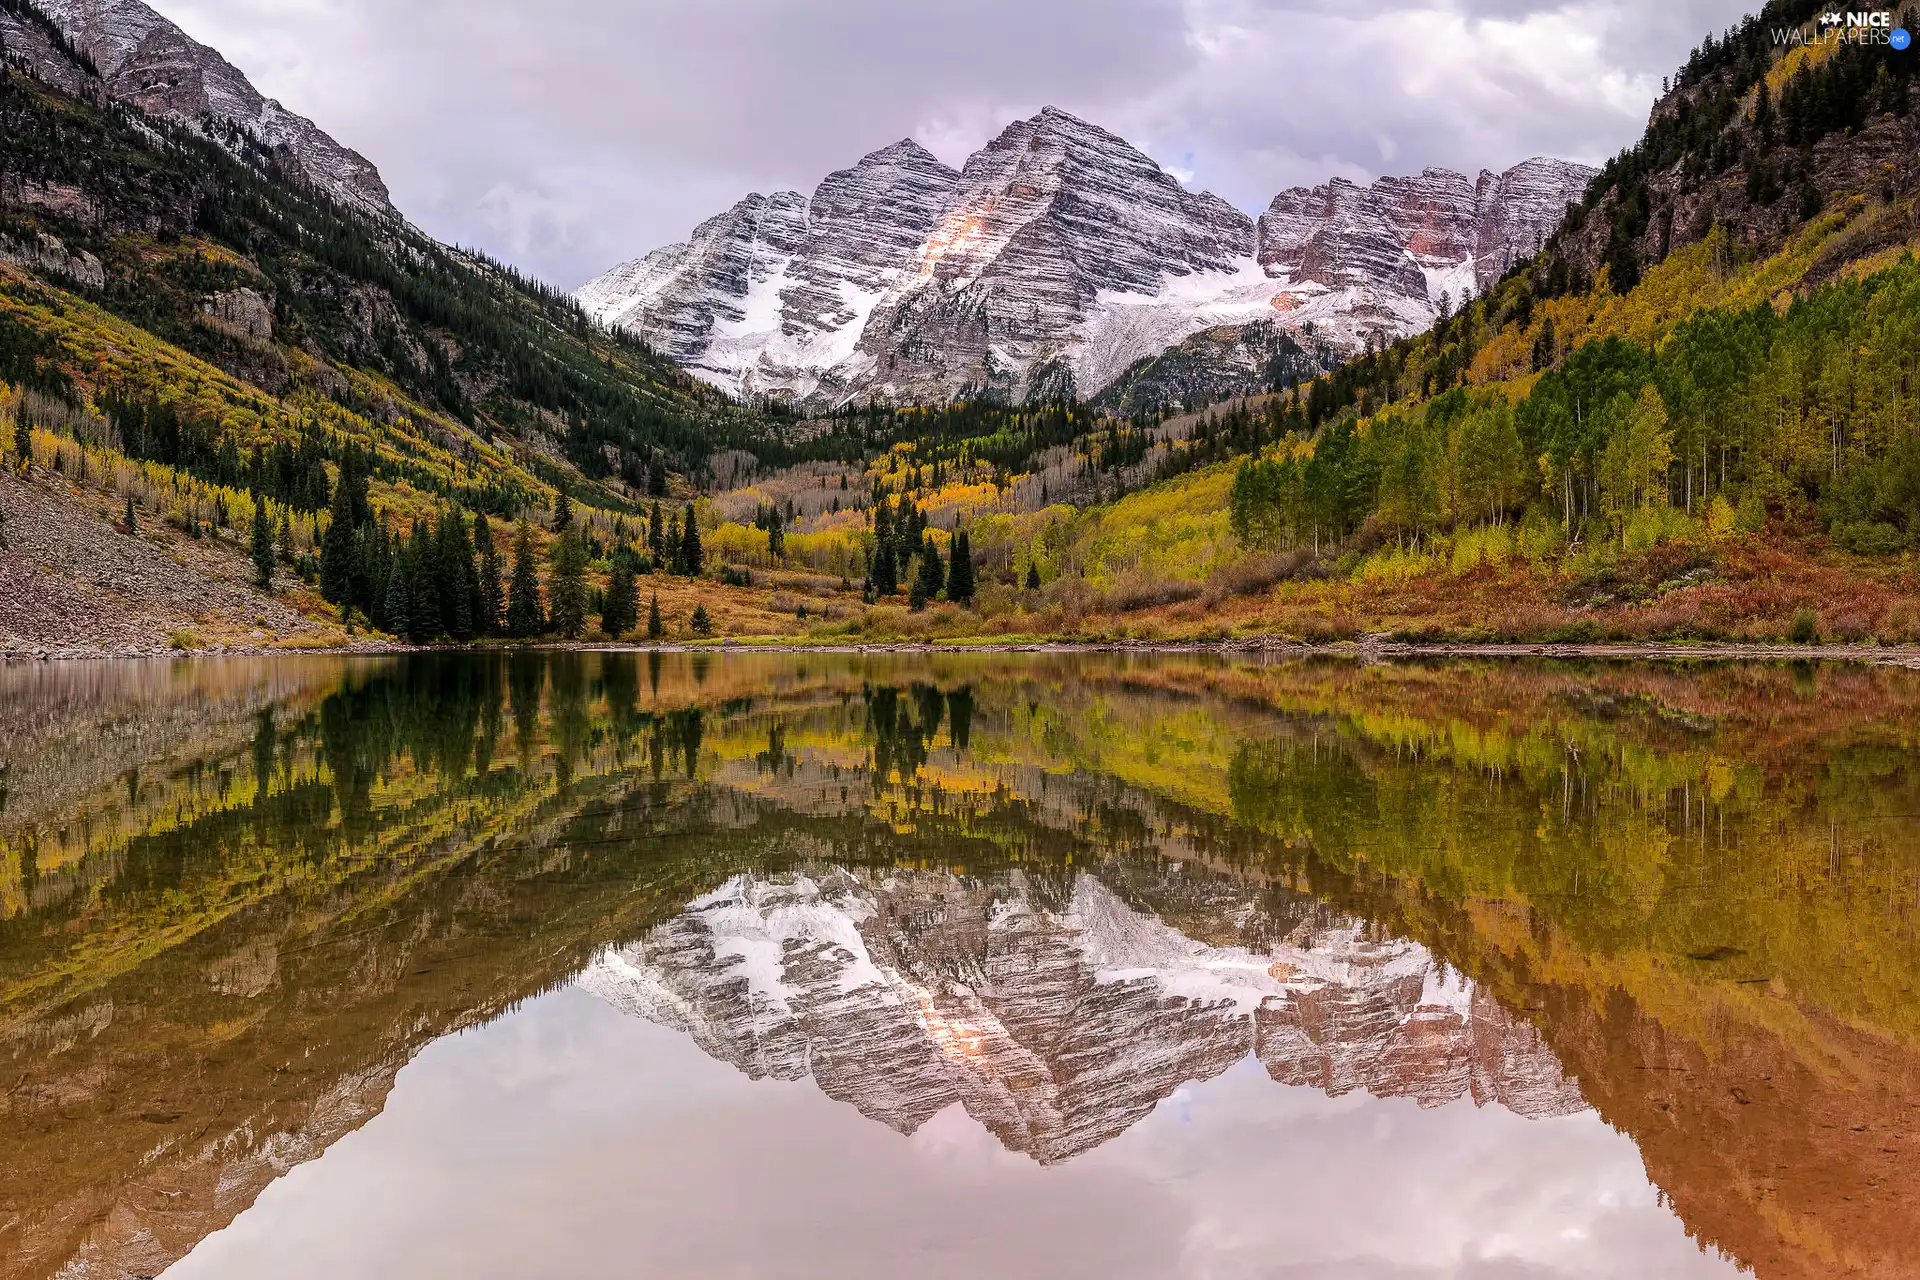 snow, Maroon Lake, The United States, trees, State of Colorado, Maroon Bells Peaks, rocky mountains, viewes